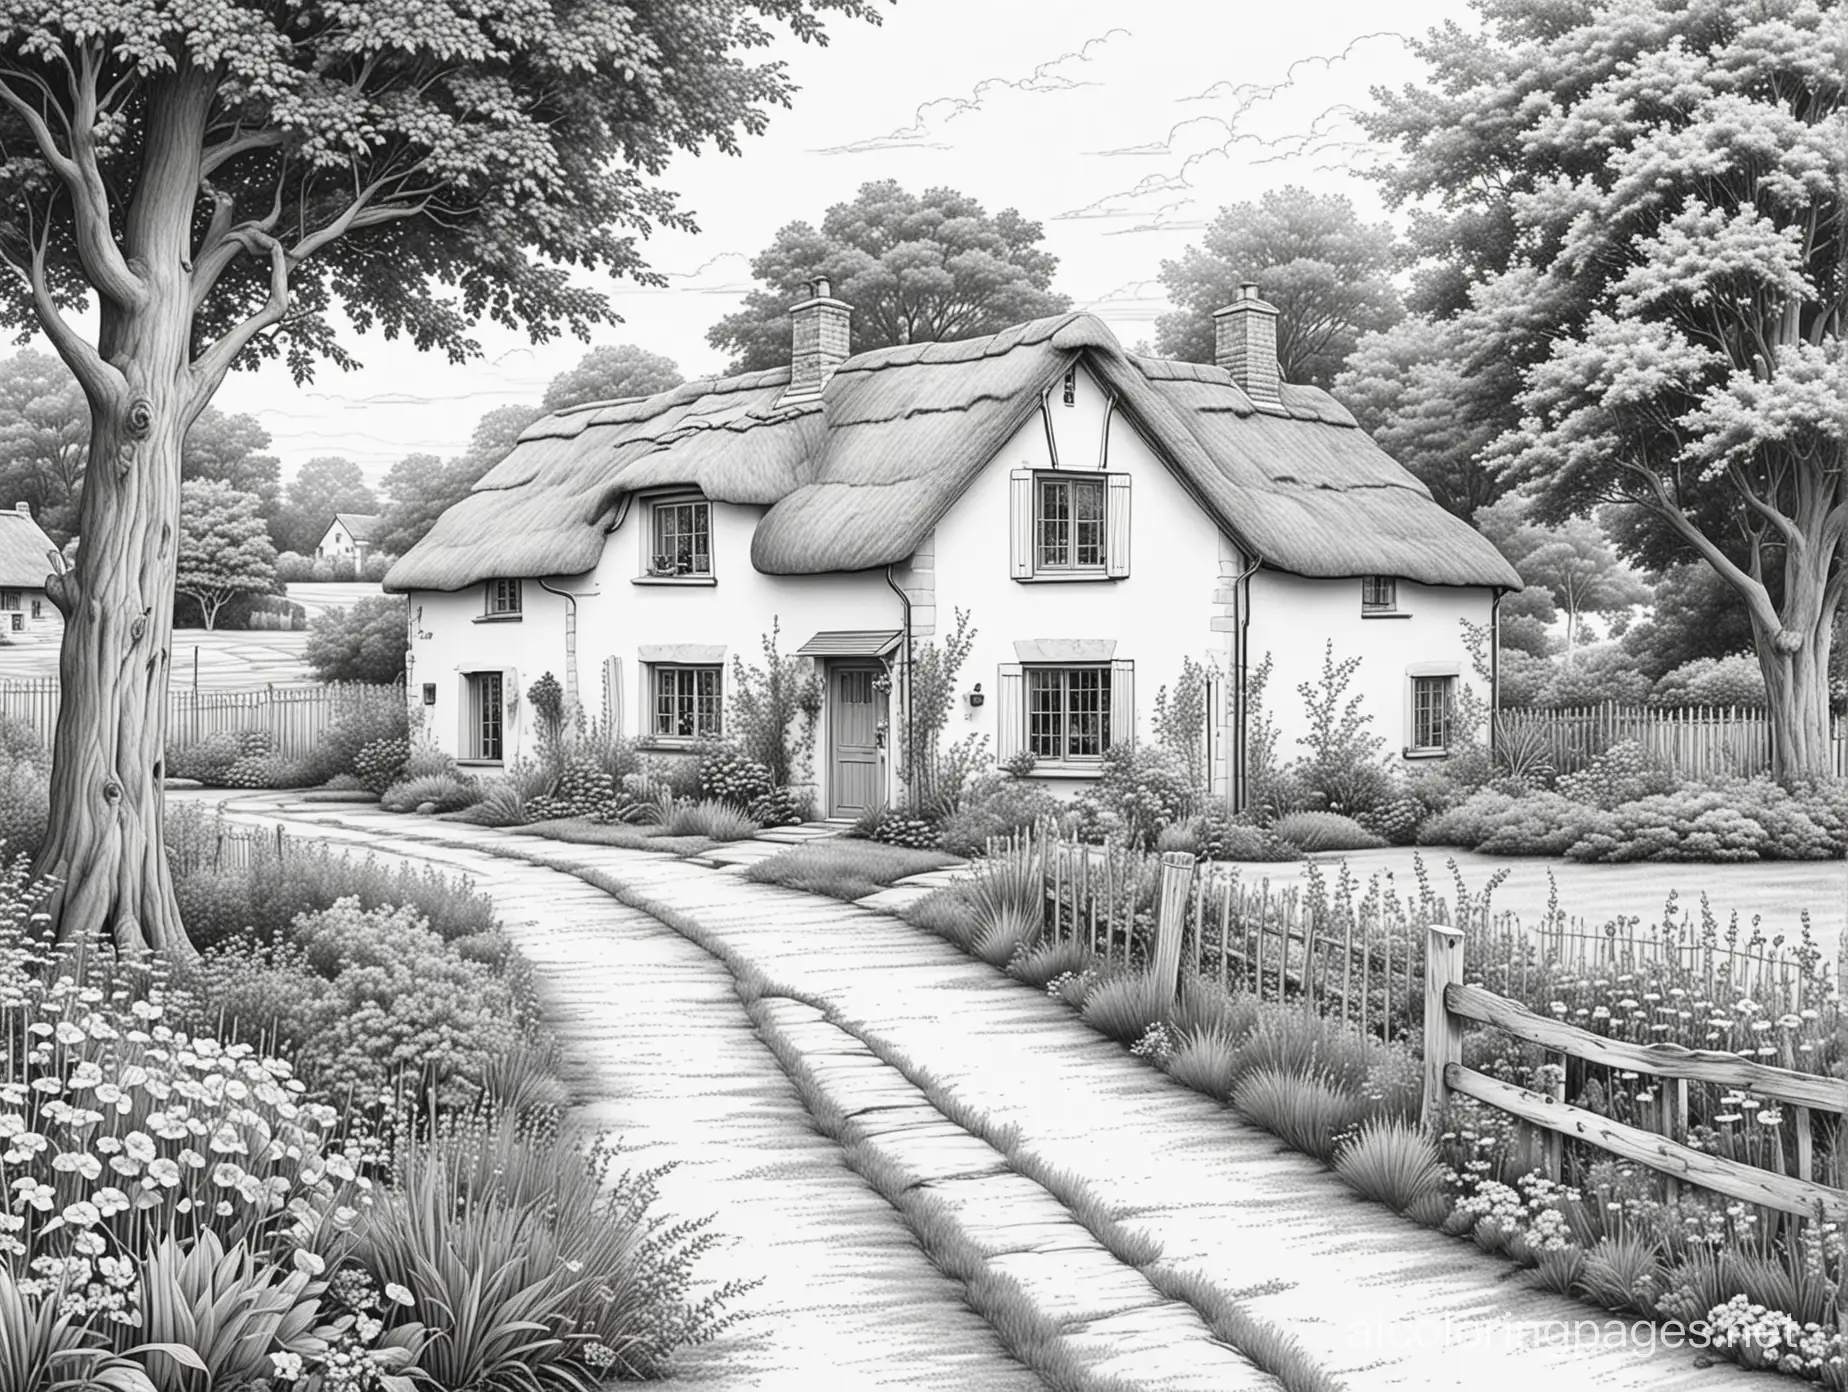 Rural-English-Cottage-Coloring-Page-for-Kids-Simple-Line-Art-in-Black-and-White